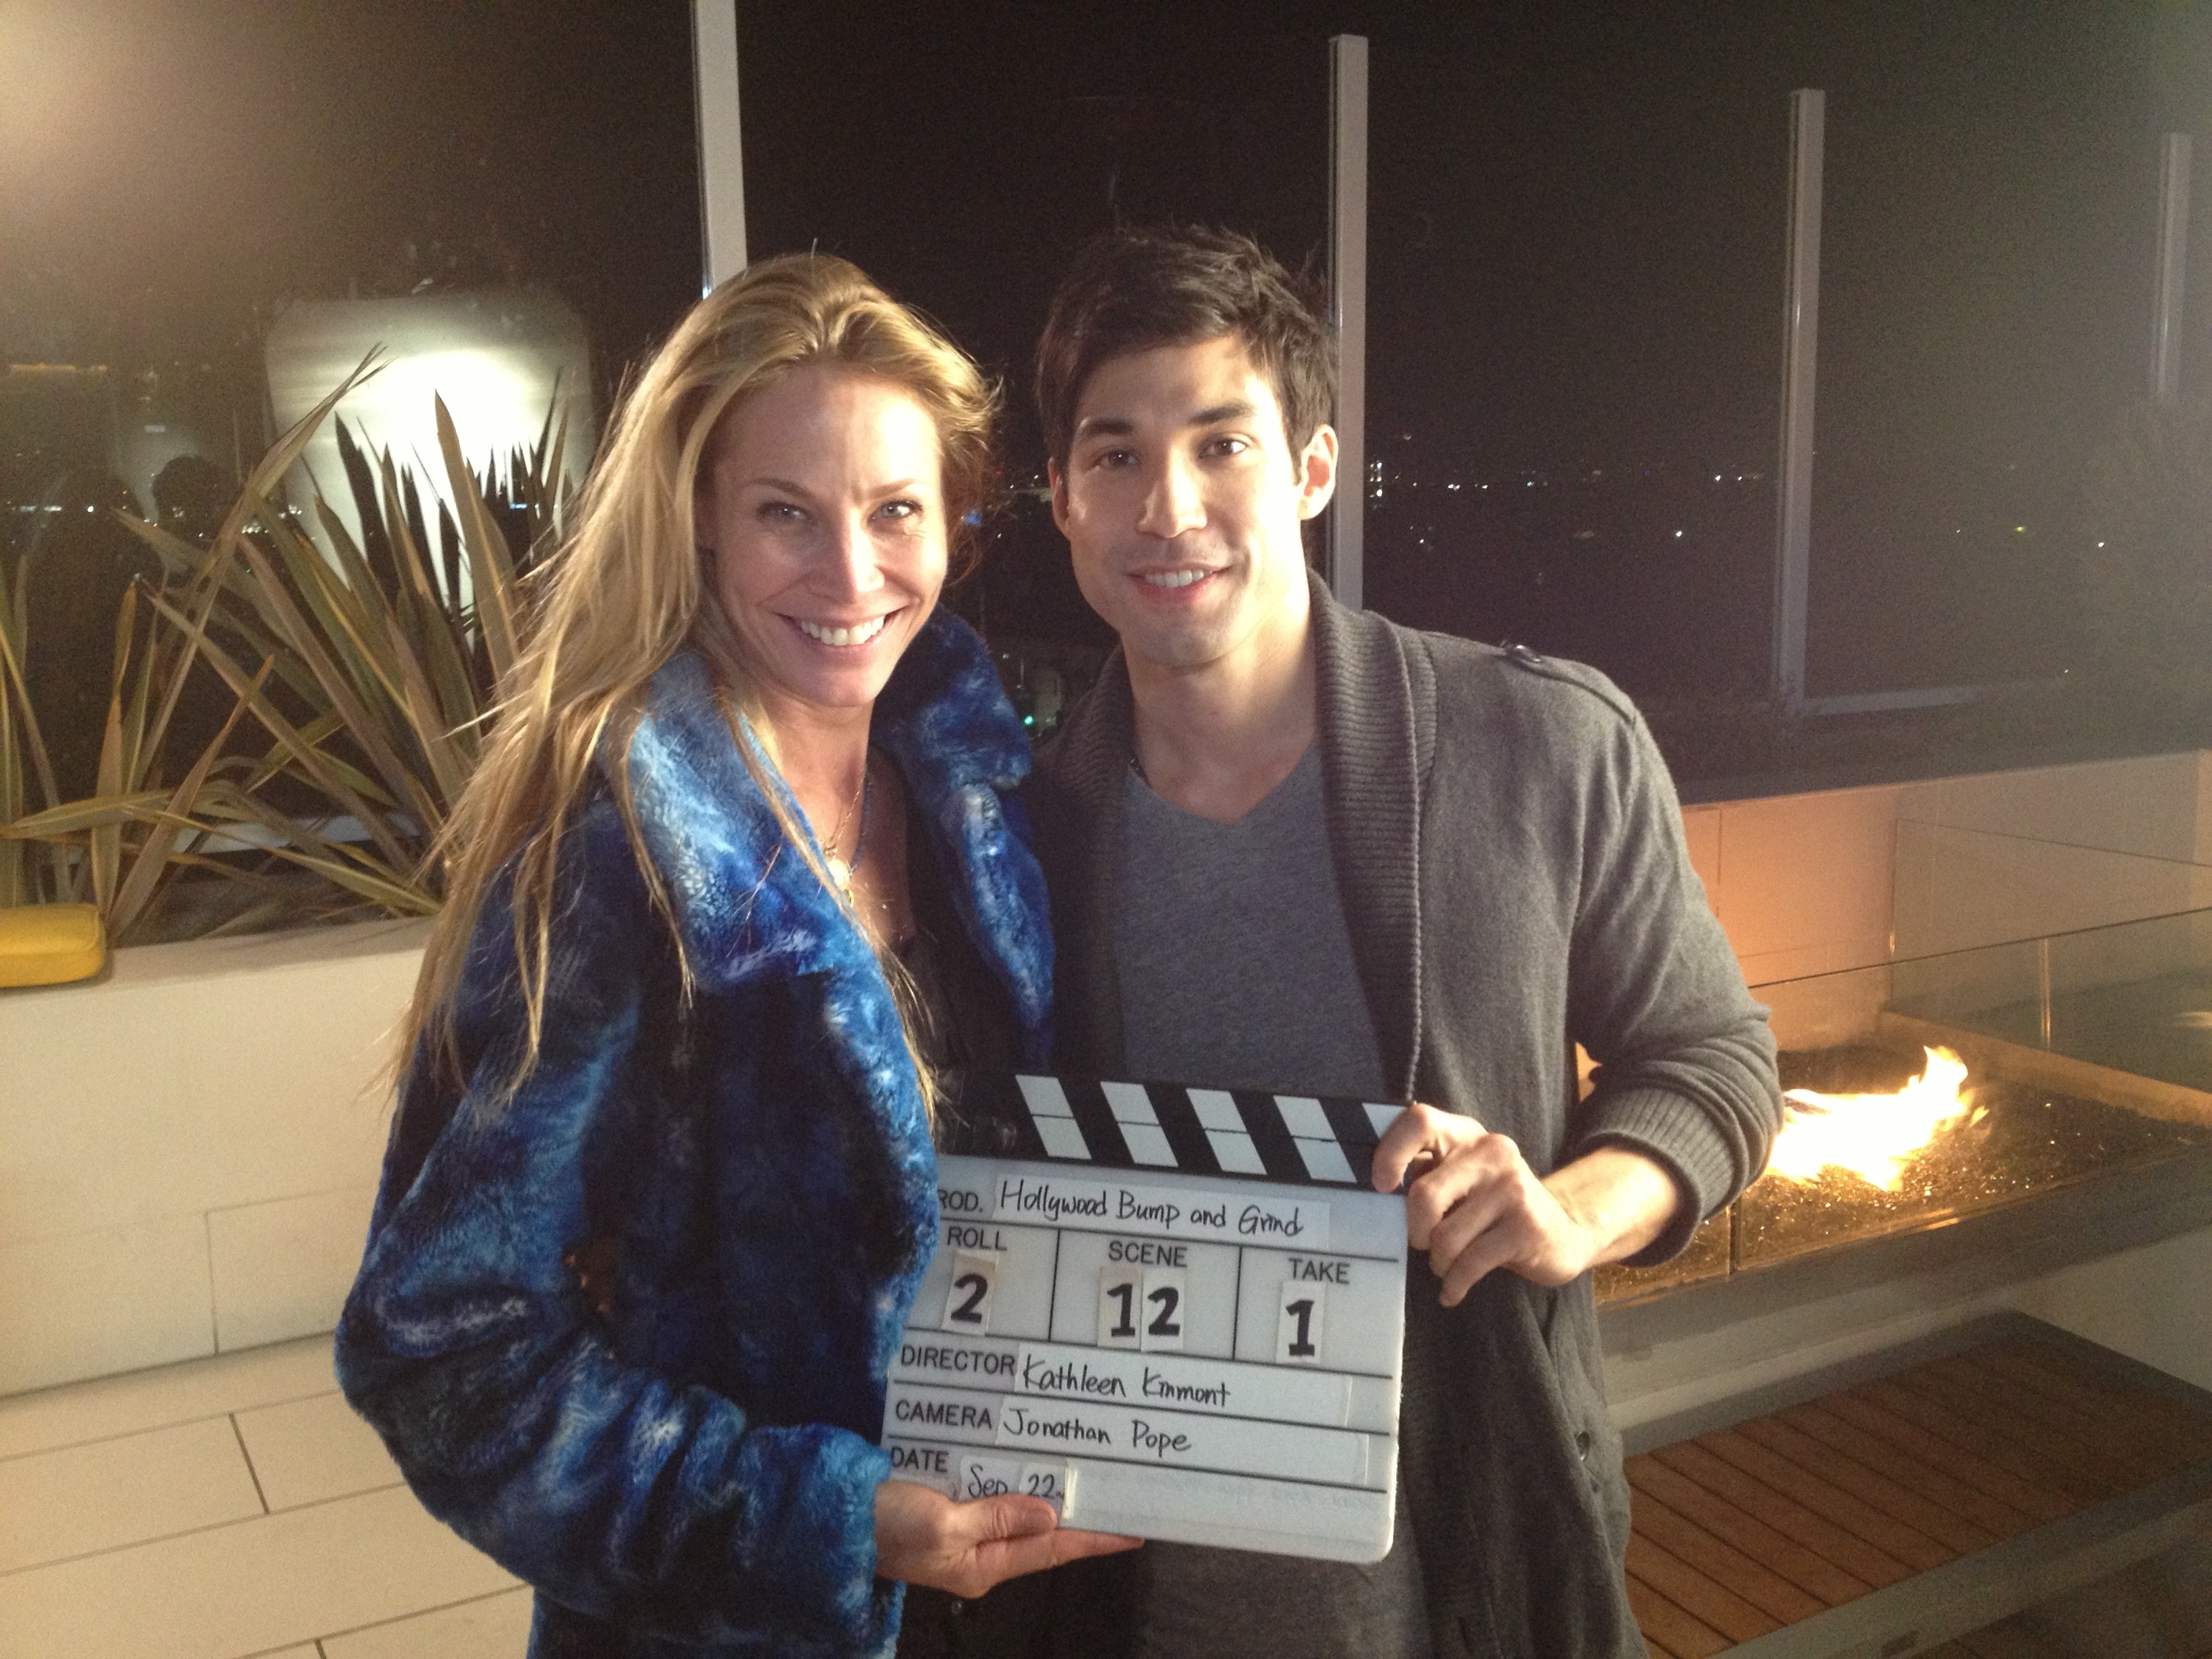 Set of Bump and Grind with Director Kathleen Kinmont